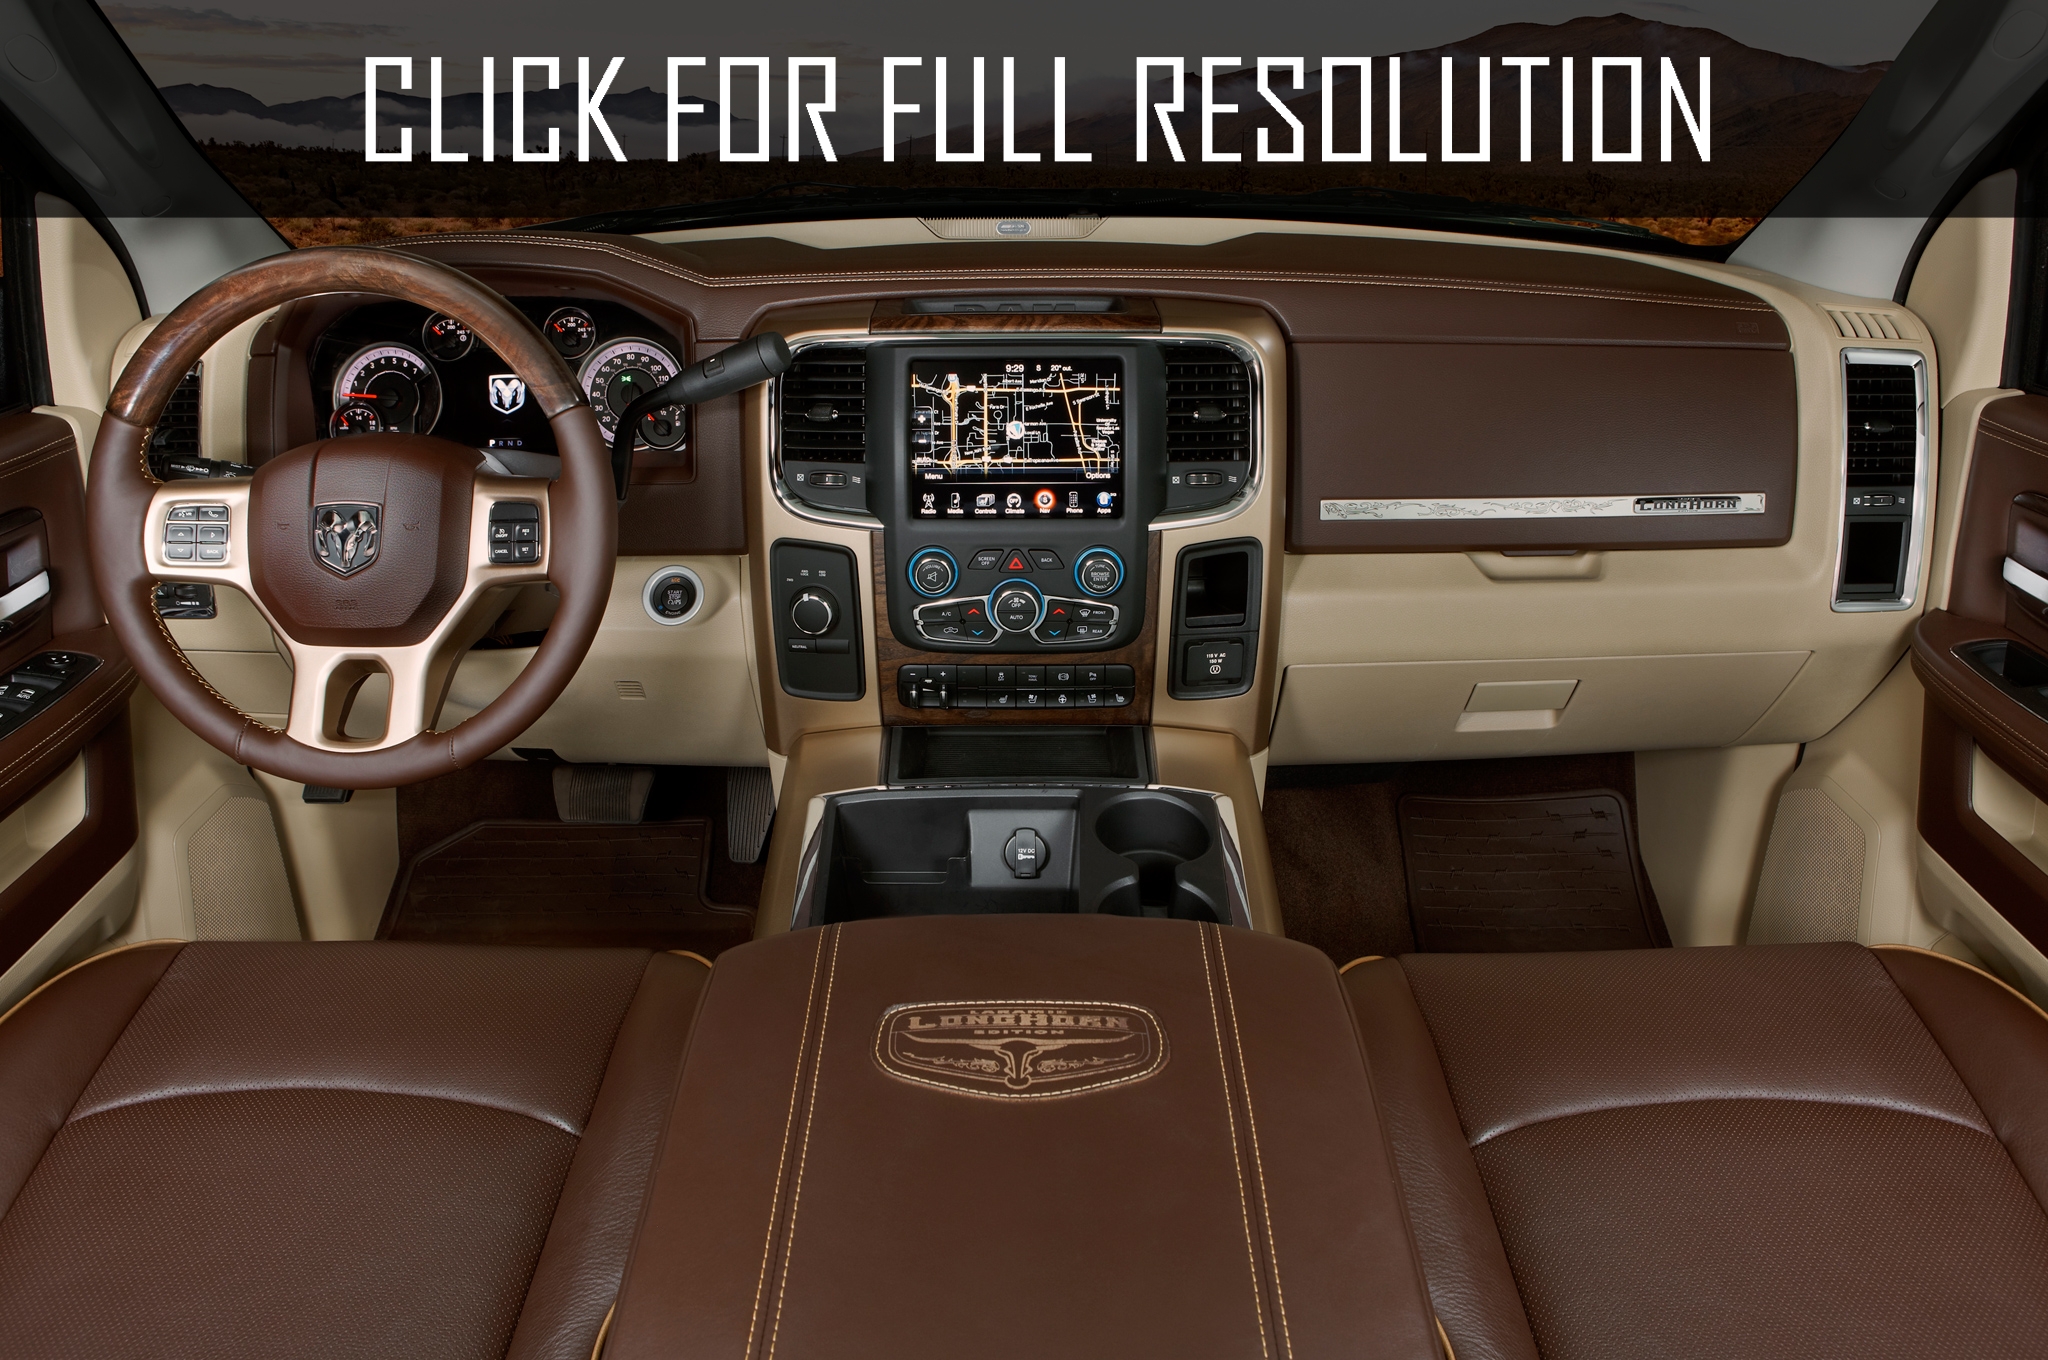 Ford F250 King Ranch 2015 Reviews Prices Ratings With